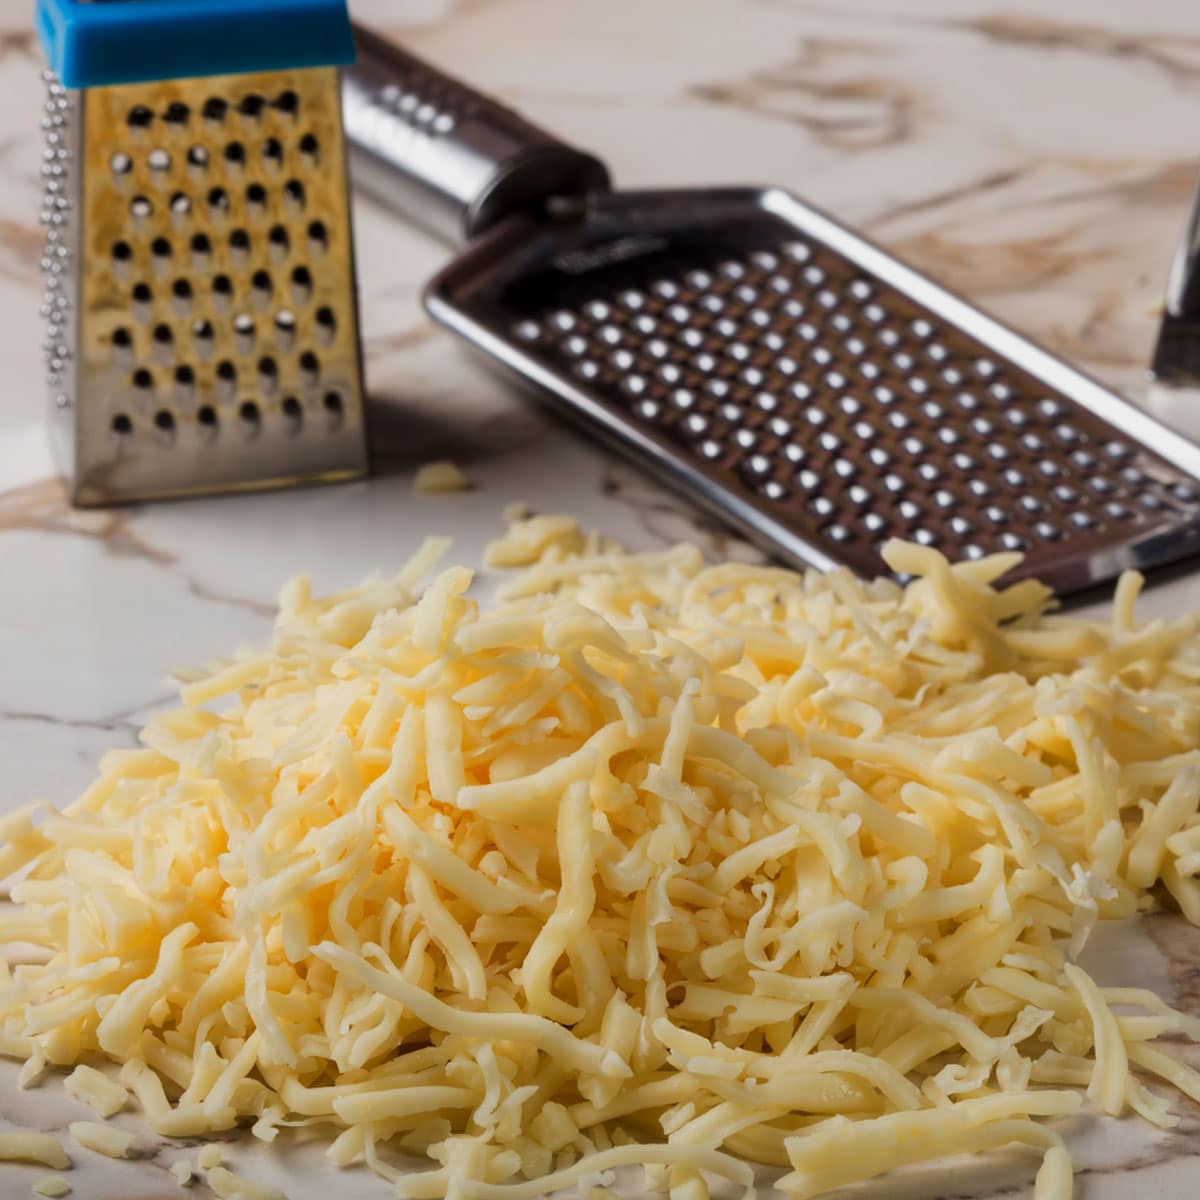 Learn the best tricks and tips for keeping shredded cheese fresh and clump-free. From storing it correctly to using the right tools and techniques, we've got you covered.